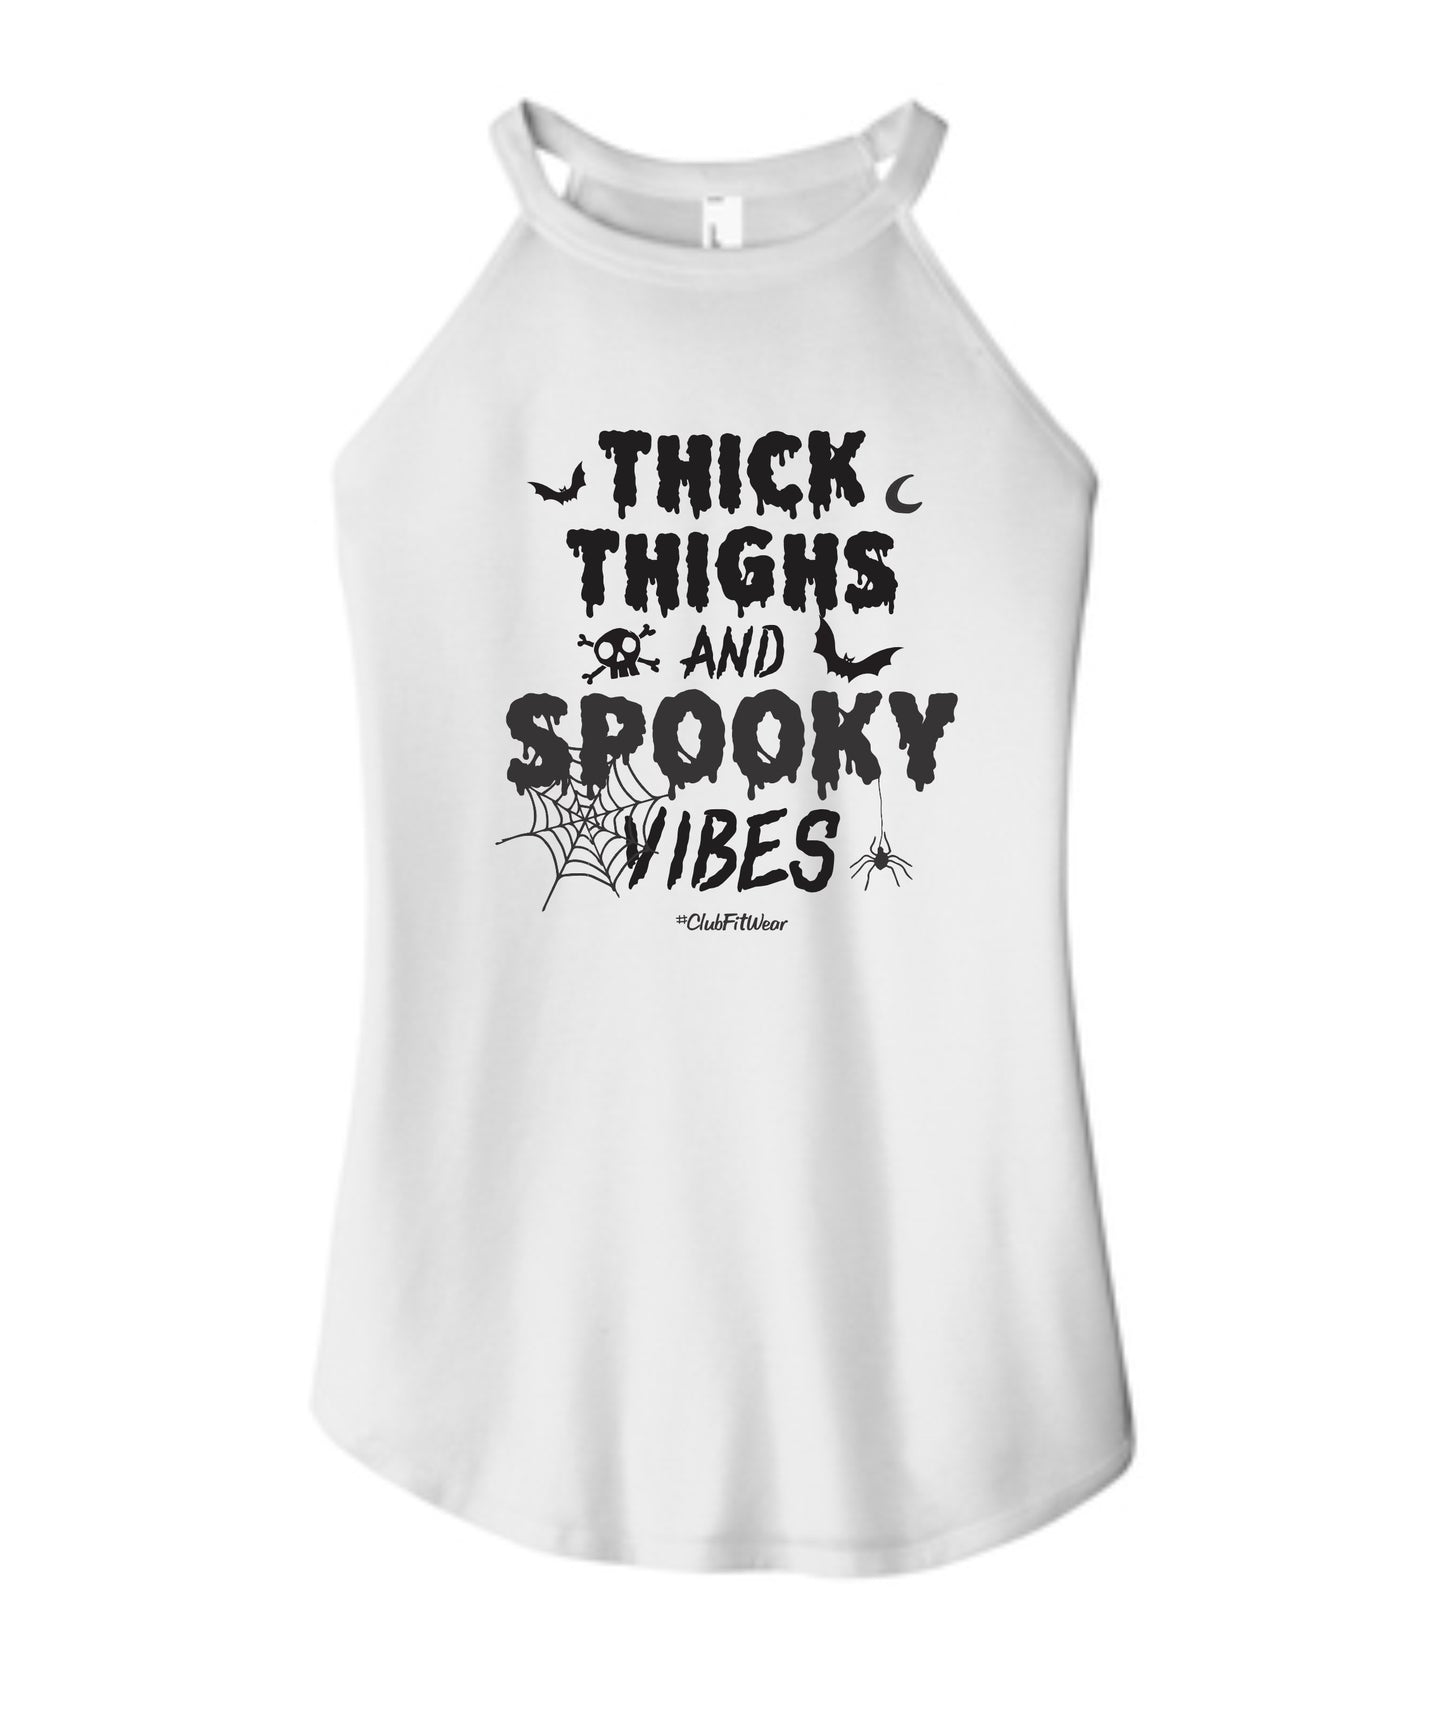 Thick Thighs and Spooky Vibes - High Neck Rocker Tank